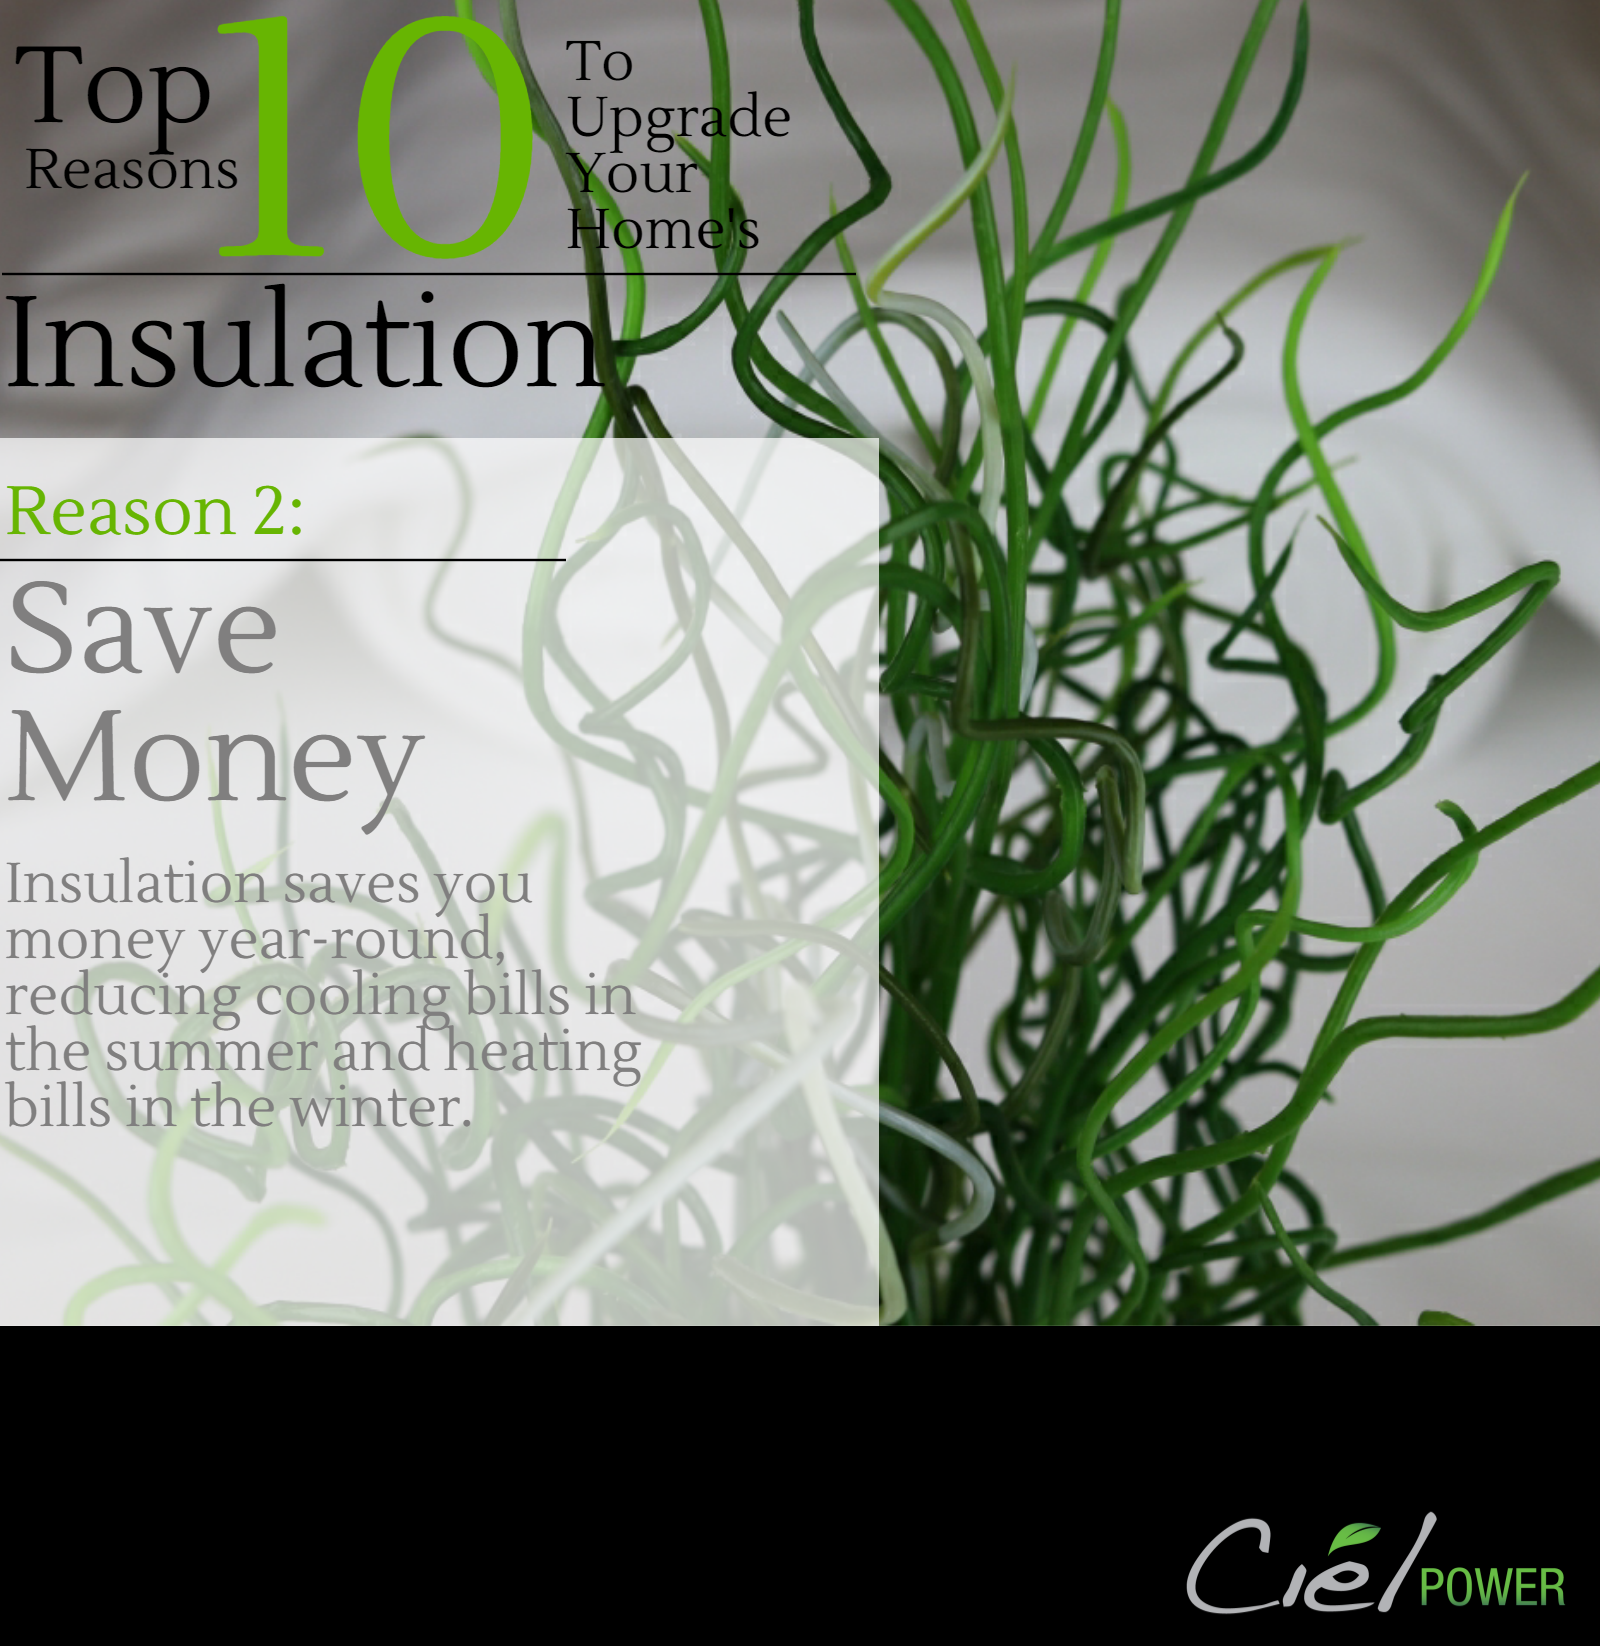 Top 10 Reasons To Upgrade Your Home's Insulation